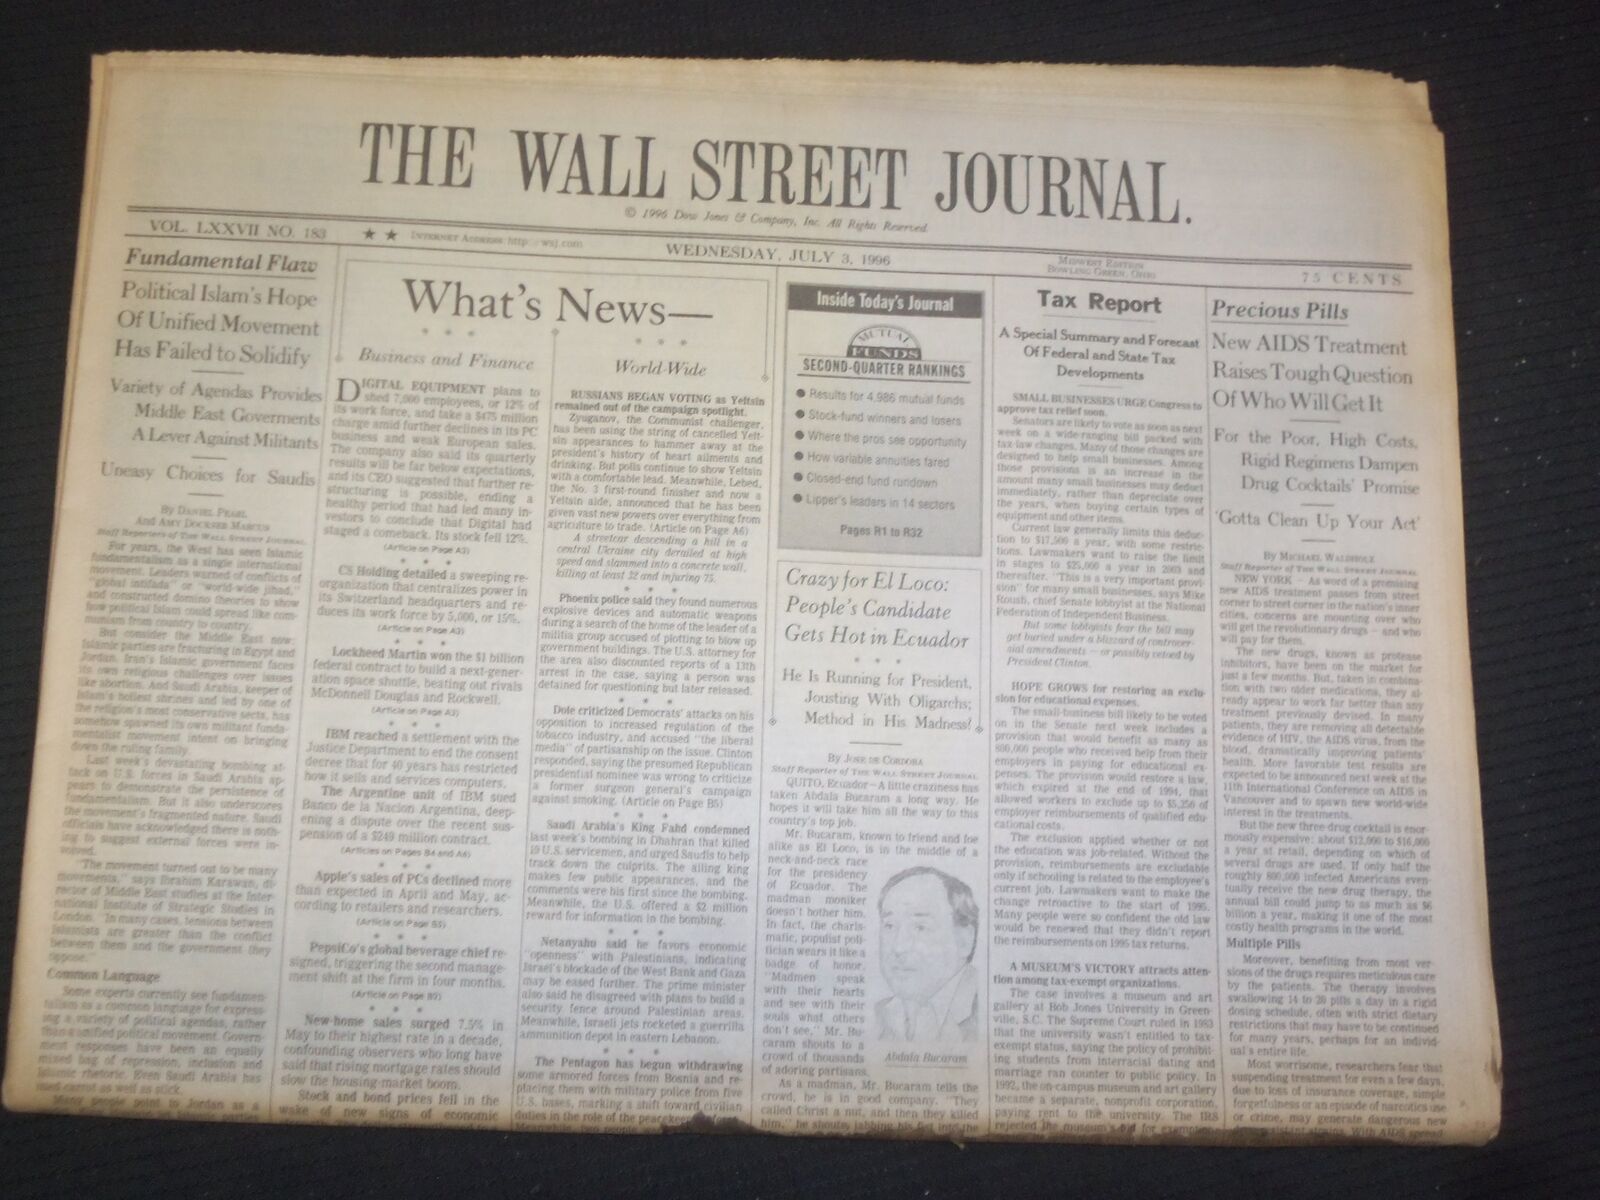 1996 JULY 3 THE WALL STREET JOURNAL - NEW AIDS TREATMENT, WHO WIL GET IT- WJ 287